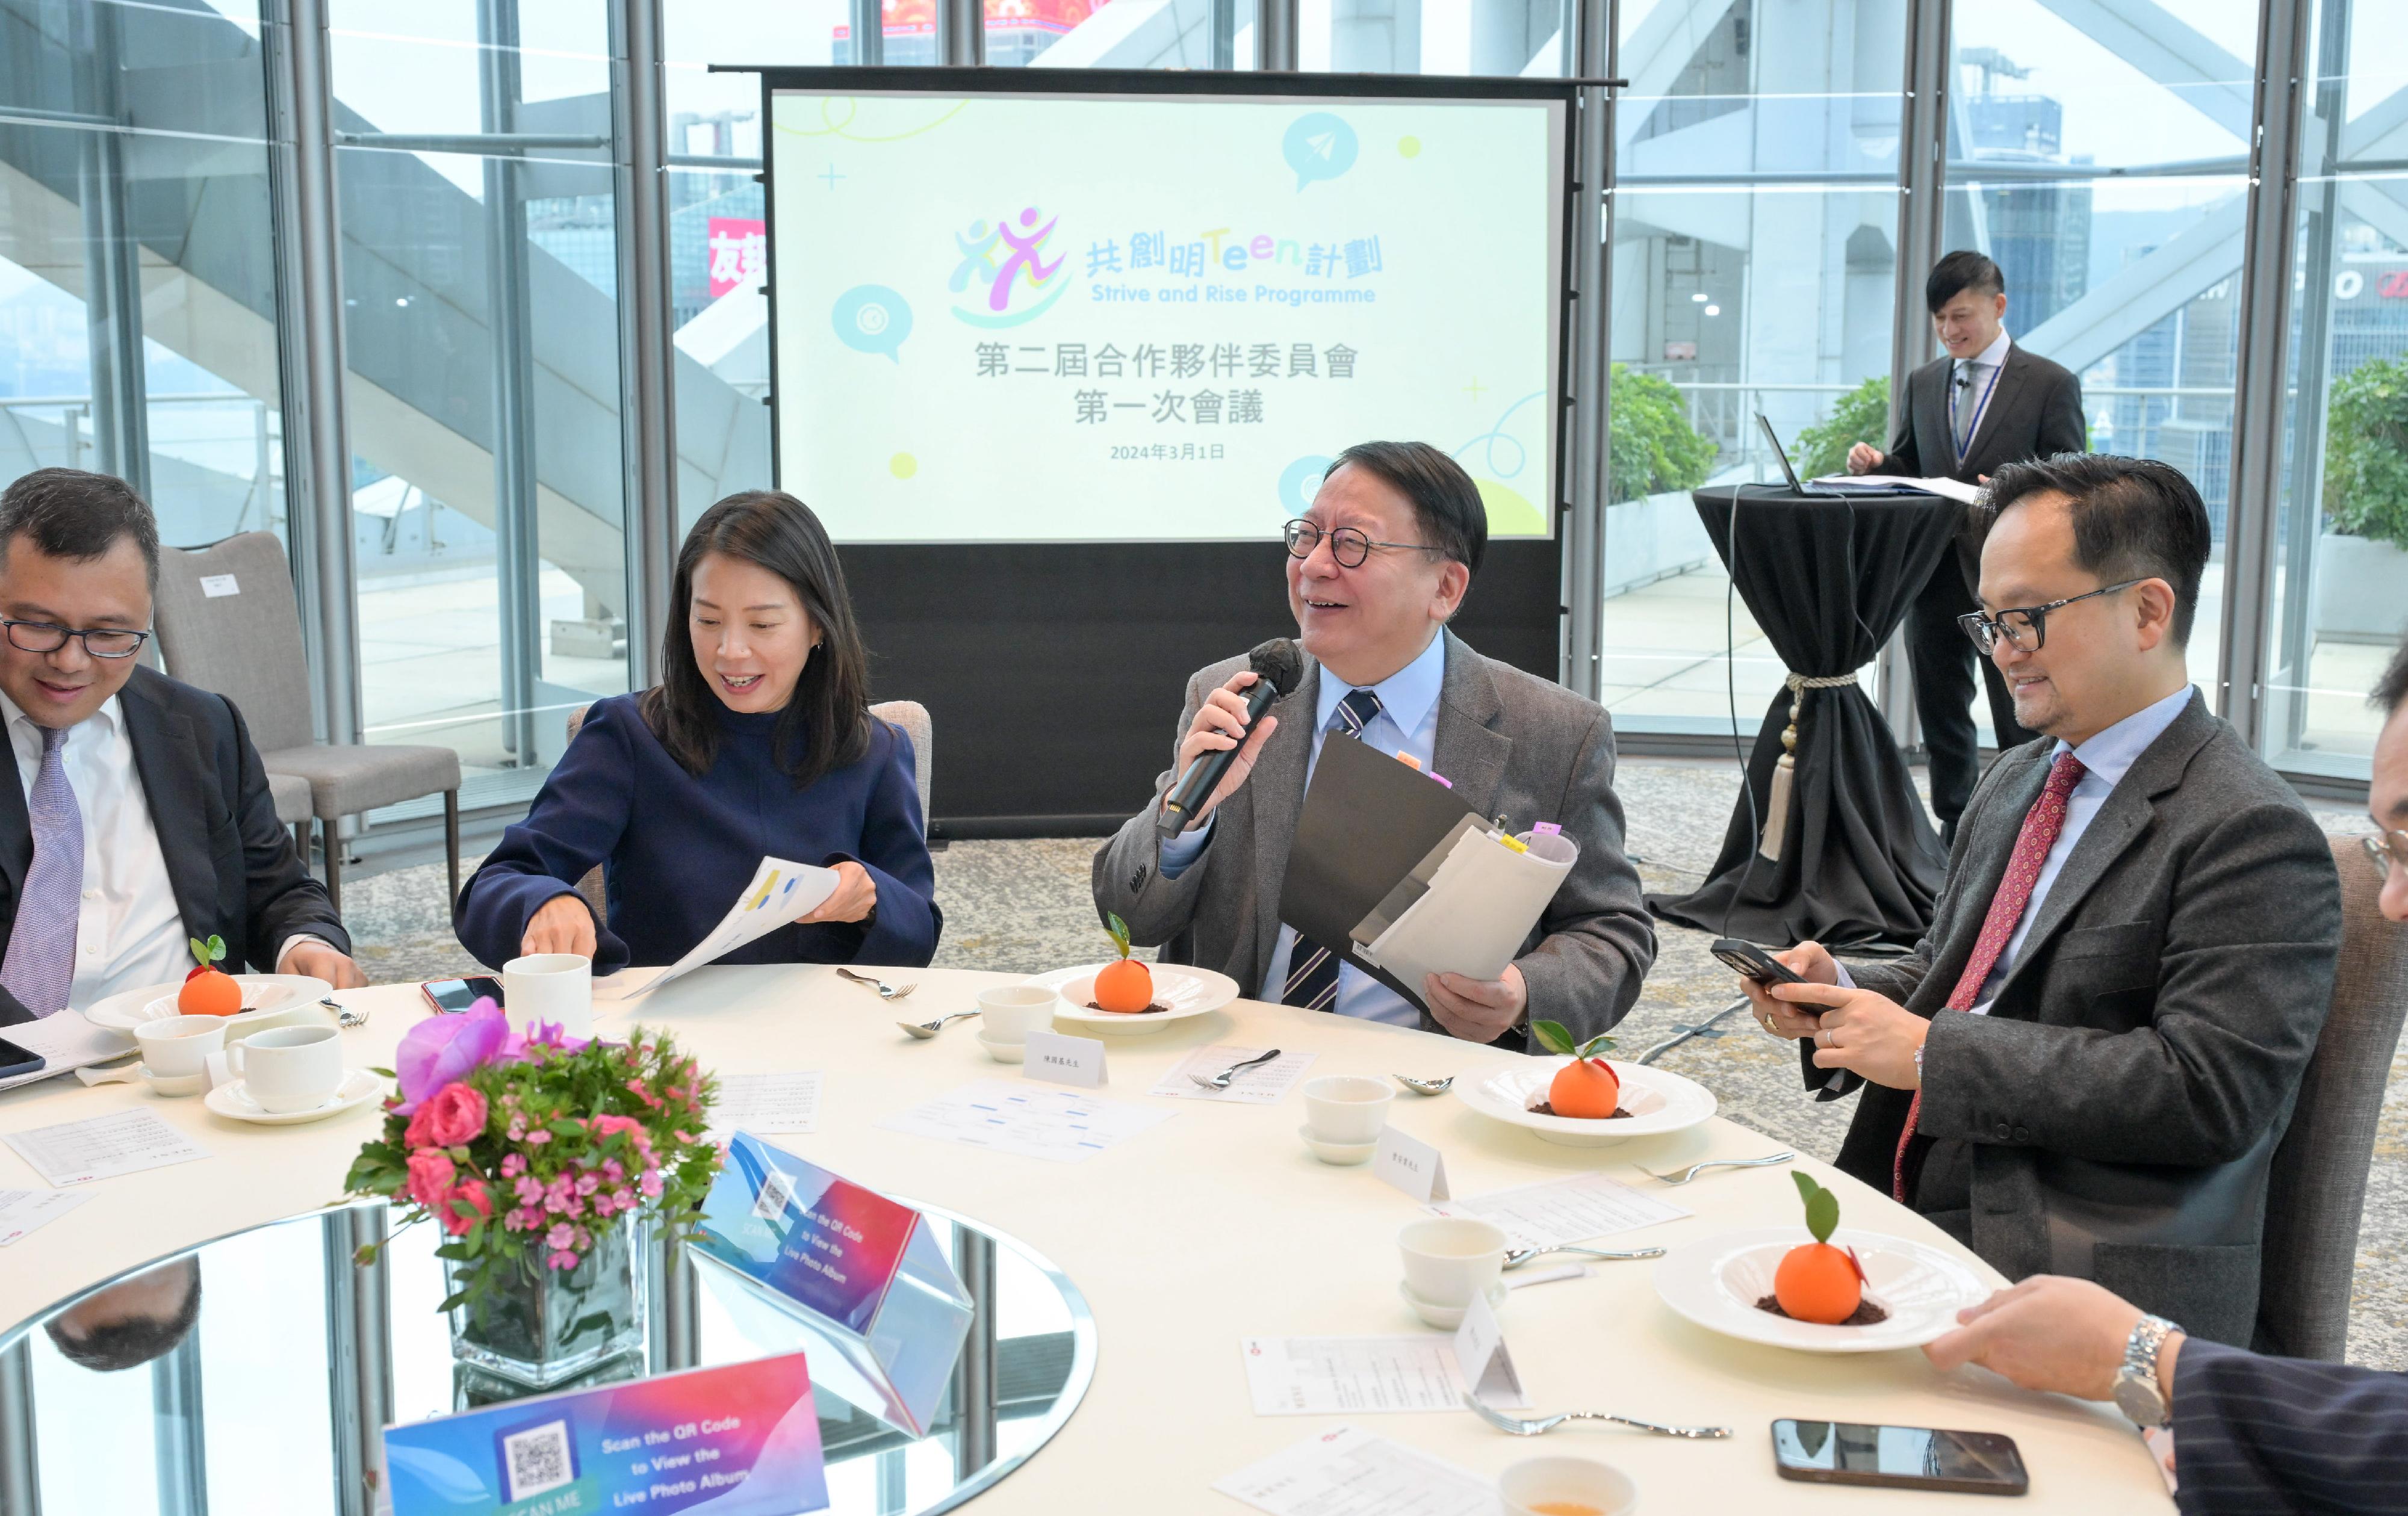 The second-term Partners' Board, chaired by the Chief Secretary for Administration, Mr Chan Kwok-ki, under the Strive and Rise Programme held its first meeting today (March 1). Photo shows Mr Chan (second right) exchanging views on the Programme with other members.